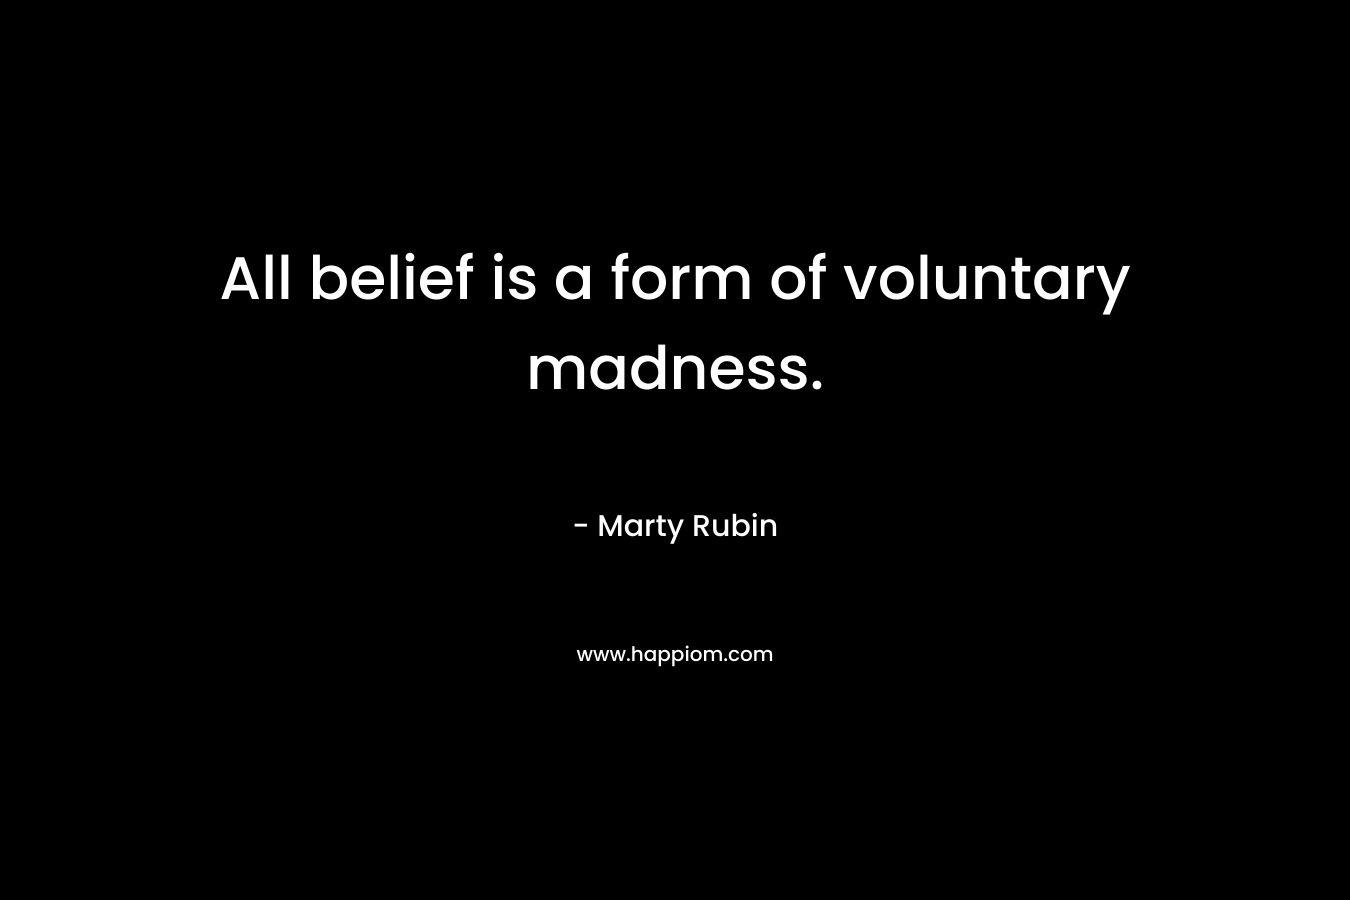 All belief is a form of voluntary madness. – Marty Rubin